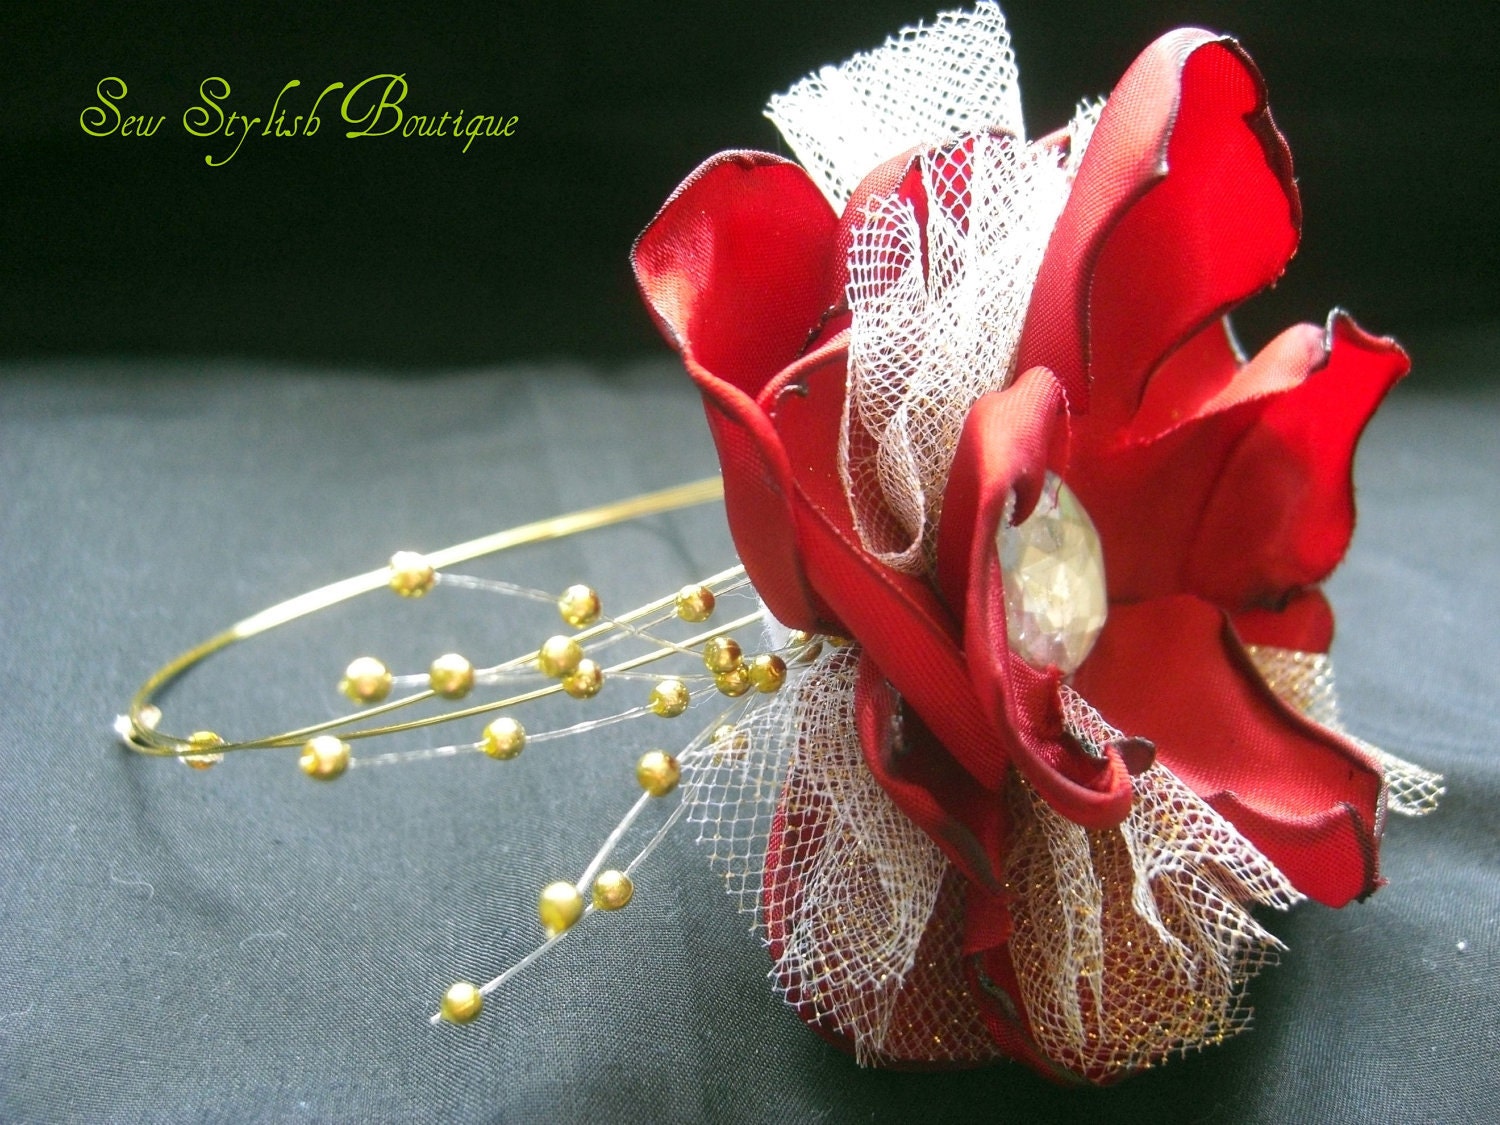 Elegant Red and Gold Flower Headband, can also be worn in an up do or as a necklace